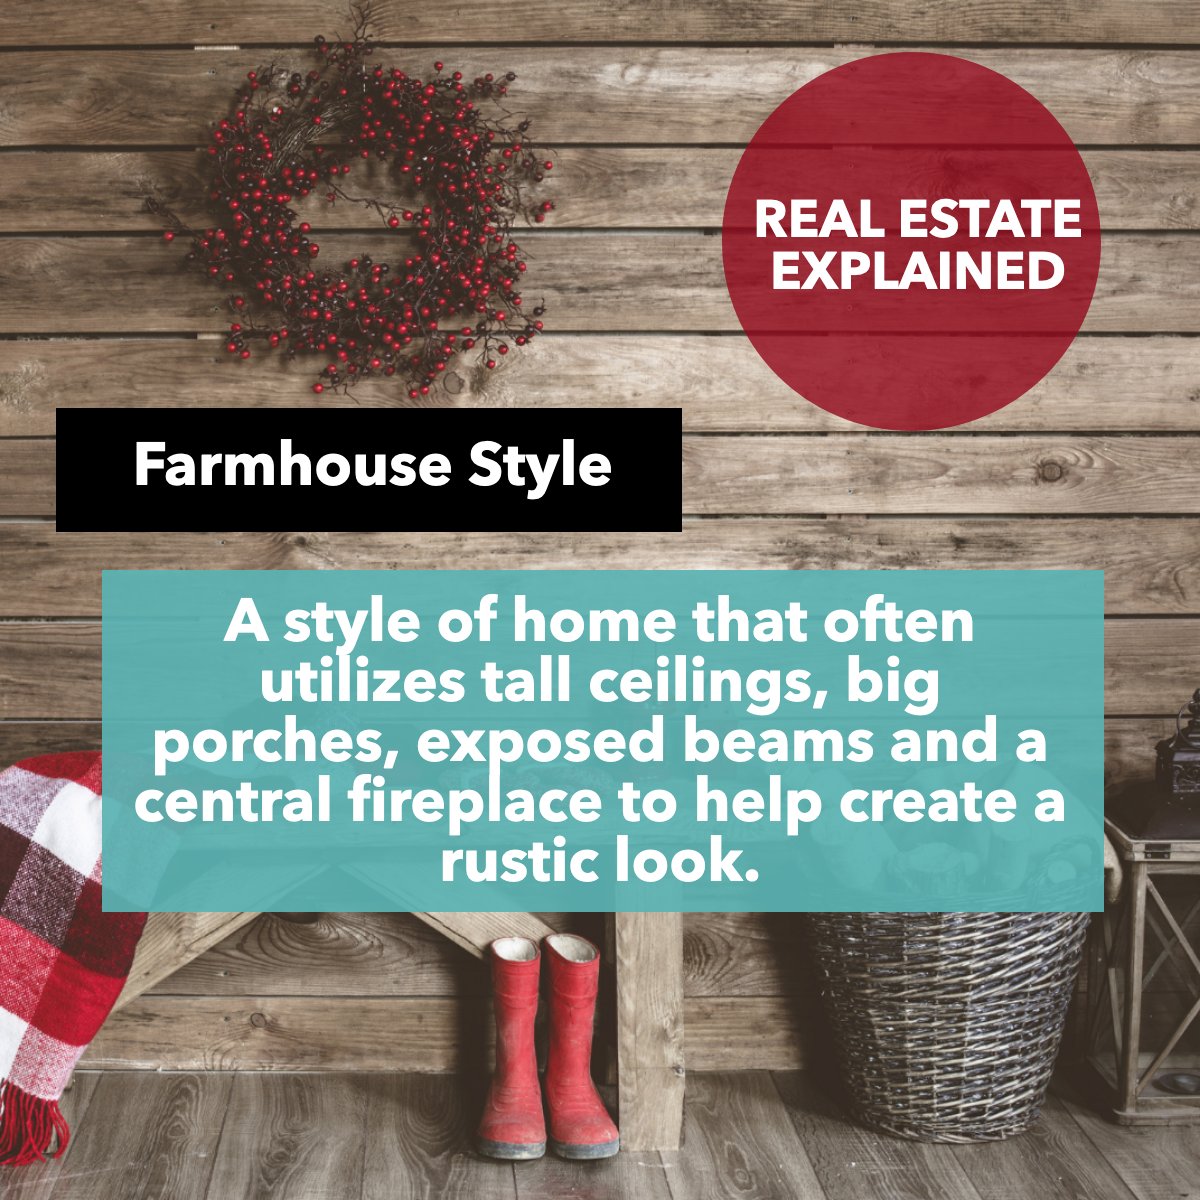 Did you know 🤔 what a Farmhouse Style is 🏡

Is this the type of house that you like

#farmhousestylehome #farmhousestyledesign #farmhousestyleinspired #farmhouseismystyle
#swfl #oleglisitsyn #oleglis #sarasota #Florida #wearemvp